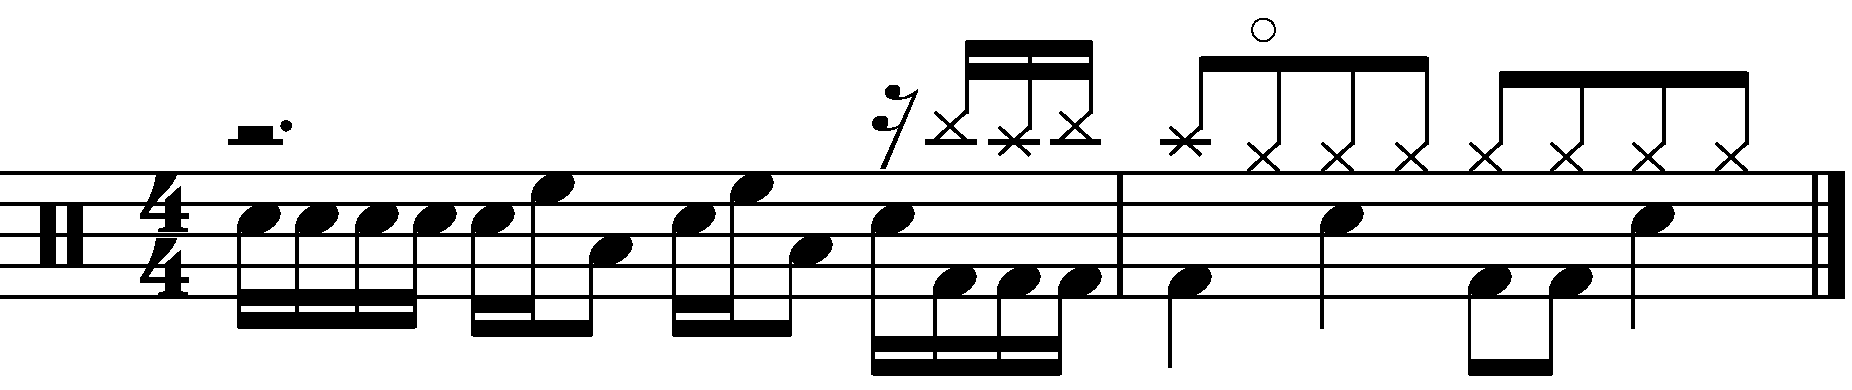 The concept applied to a roll based fill